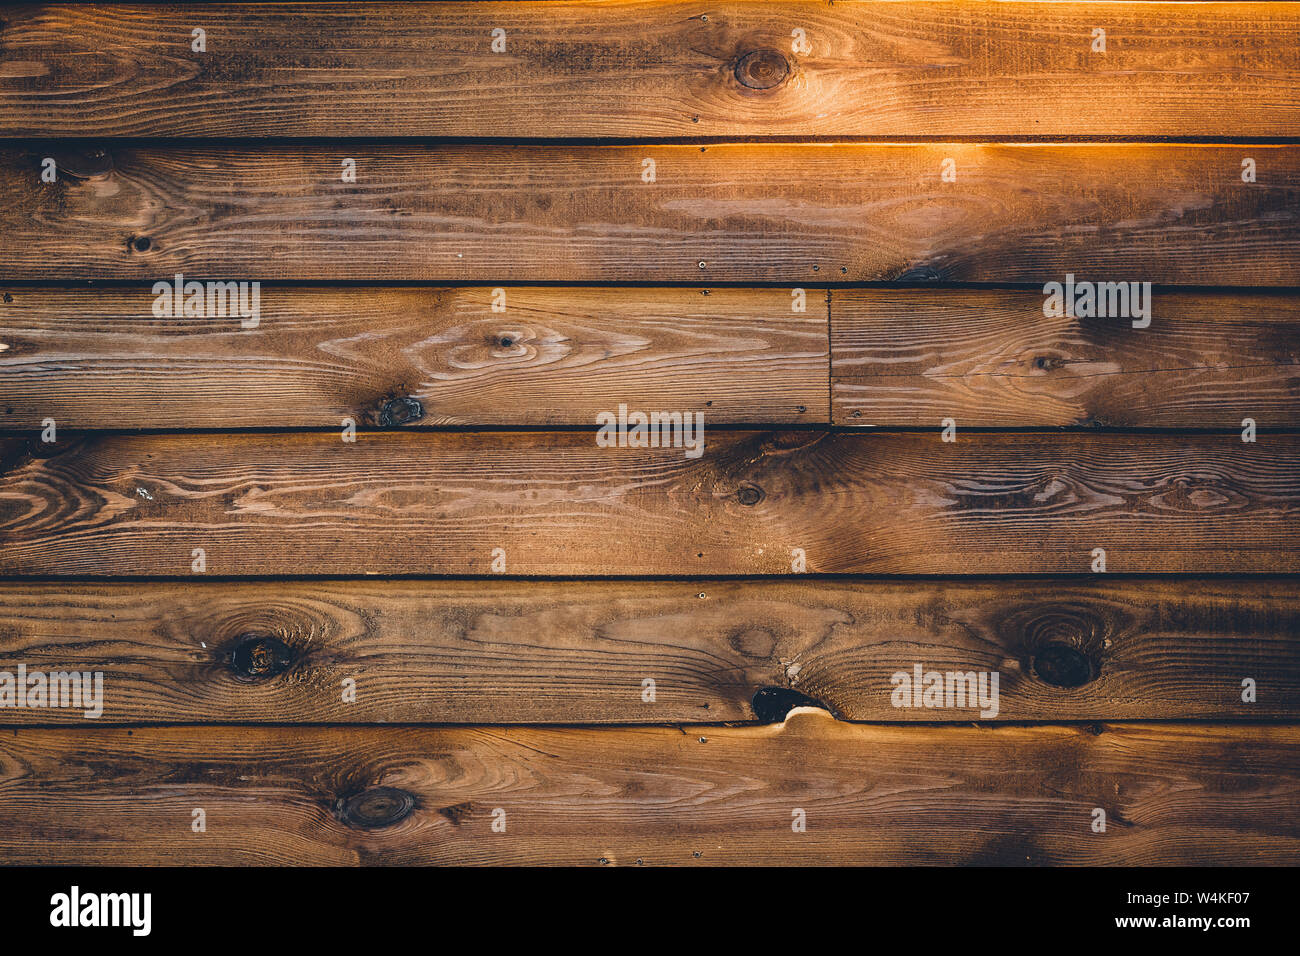 Old wood plank background. Brown wooden texture at horizontal striped. Vintage wall surface, pattern. Dark weathered hardwood, antique board, furnitur Stock Photo